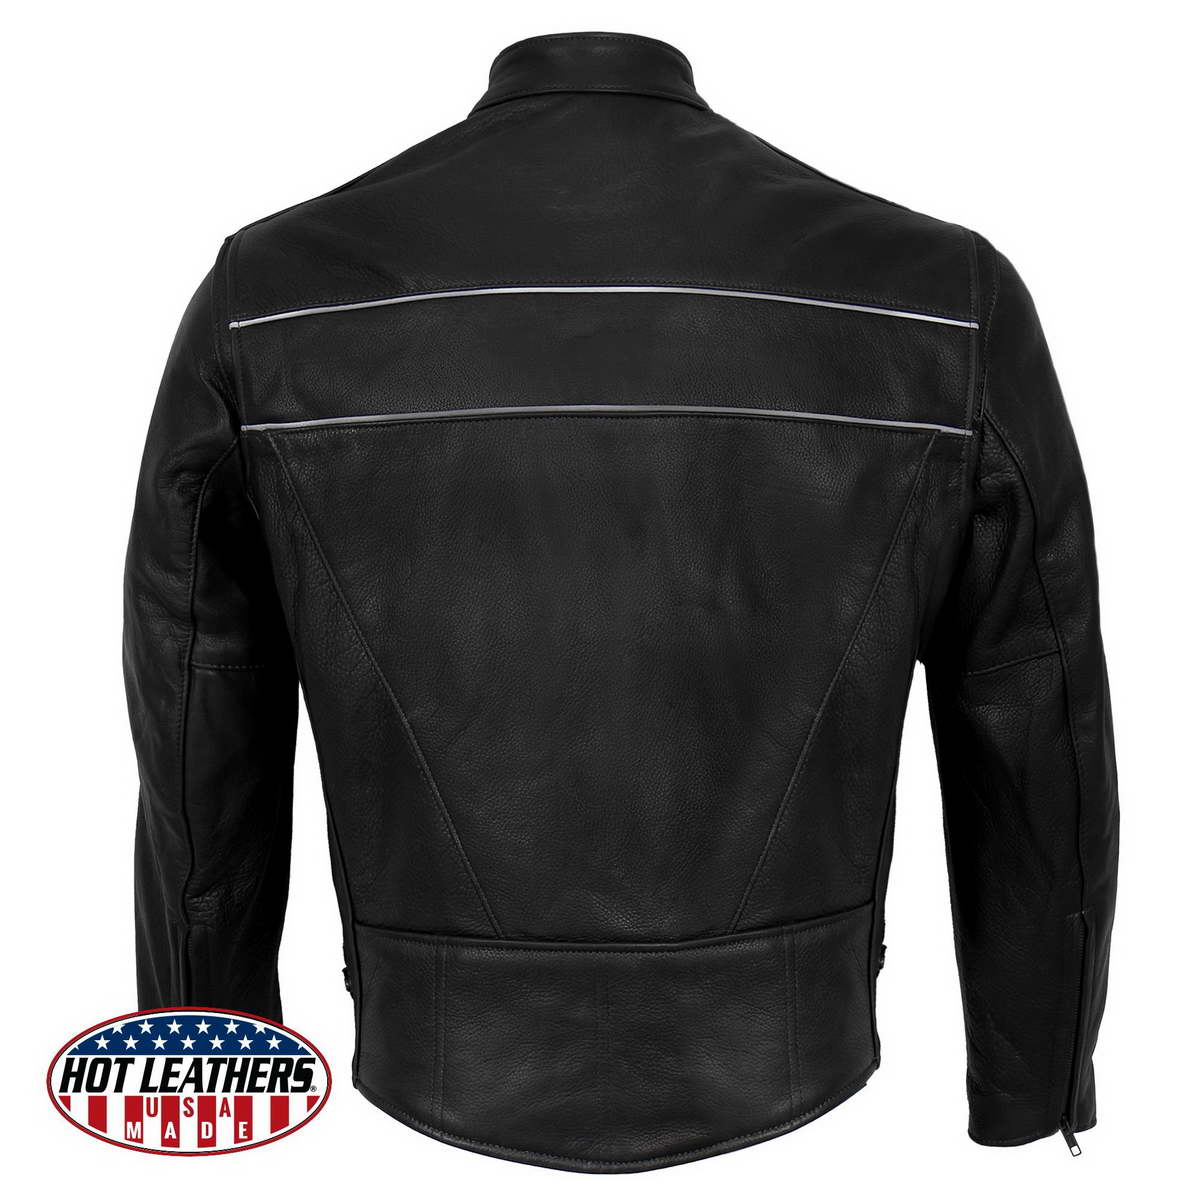 Hot Leathers JKM5003 USA Made Men's Premium Black Leather Motorcycle Jacket with Reflective Piping